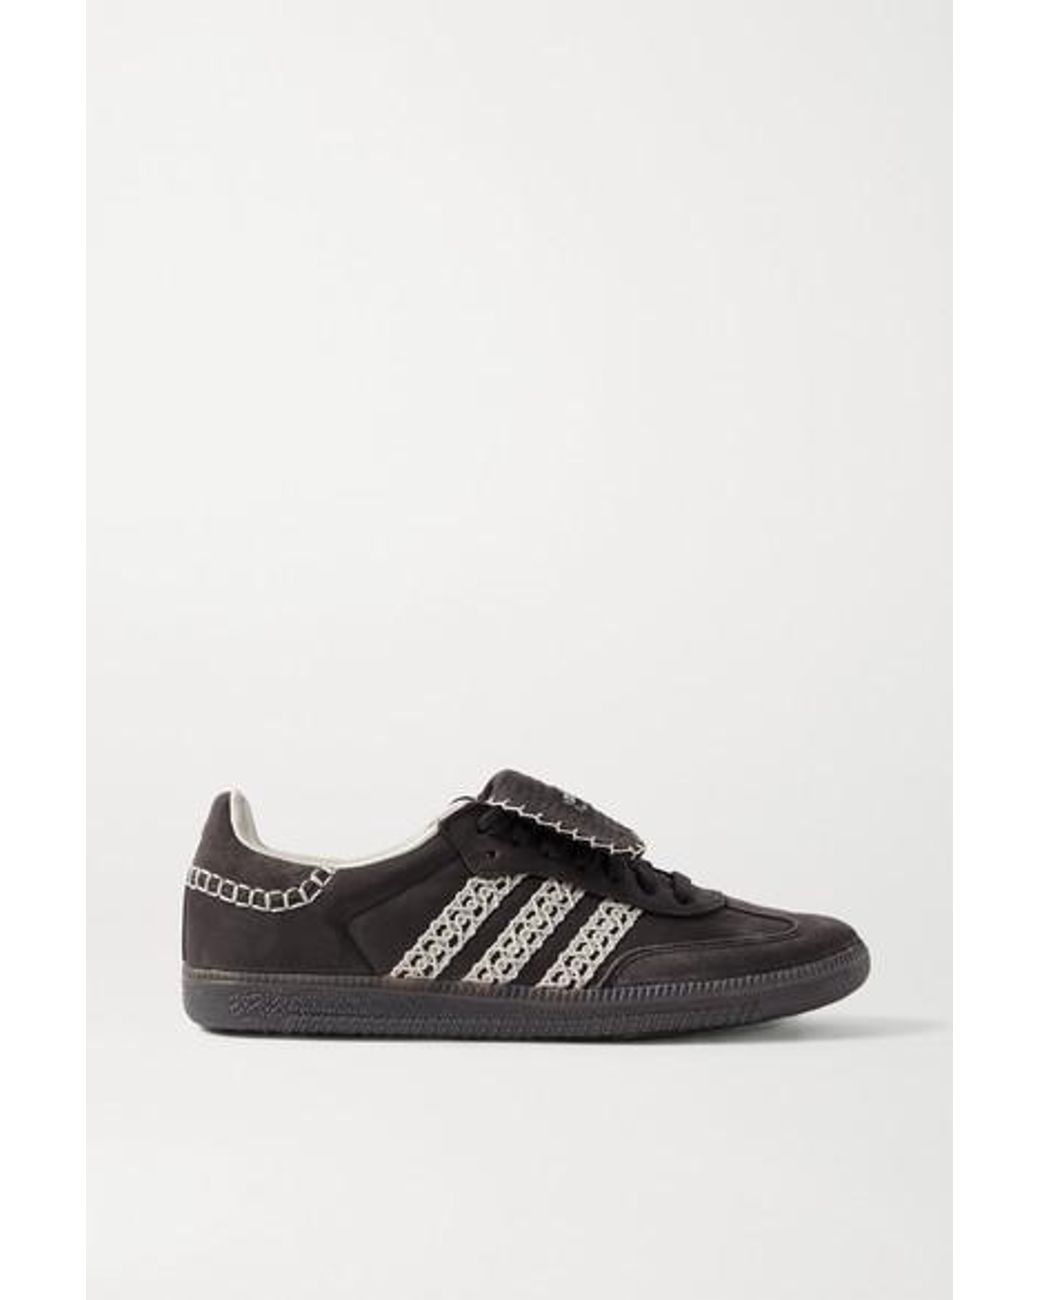 adidas Originals + Wales Bonner Samba Crochet-trimmed Suede And Leather  Sneakers in Black | Lyst